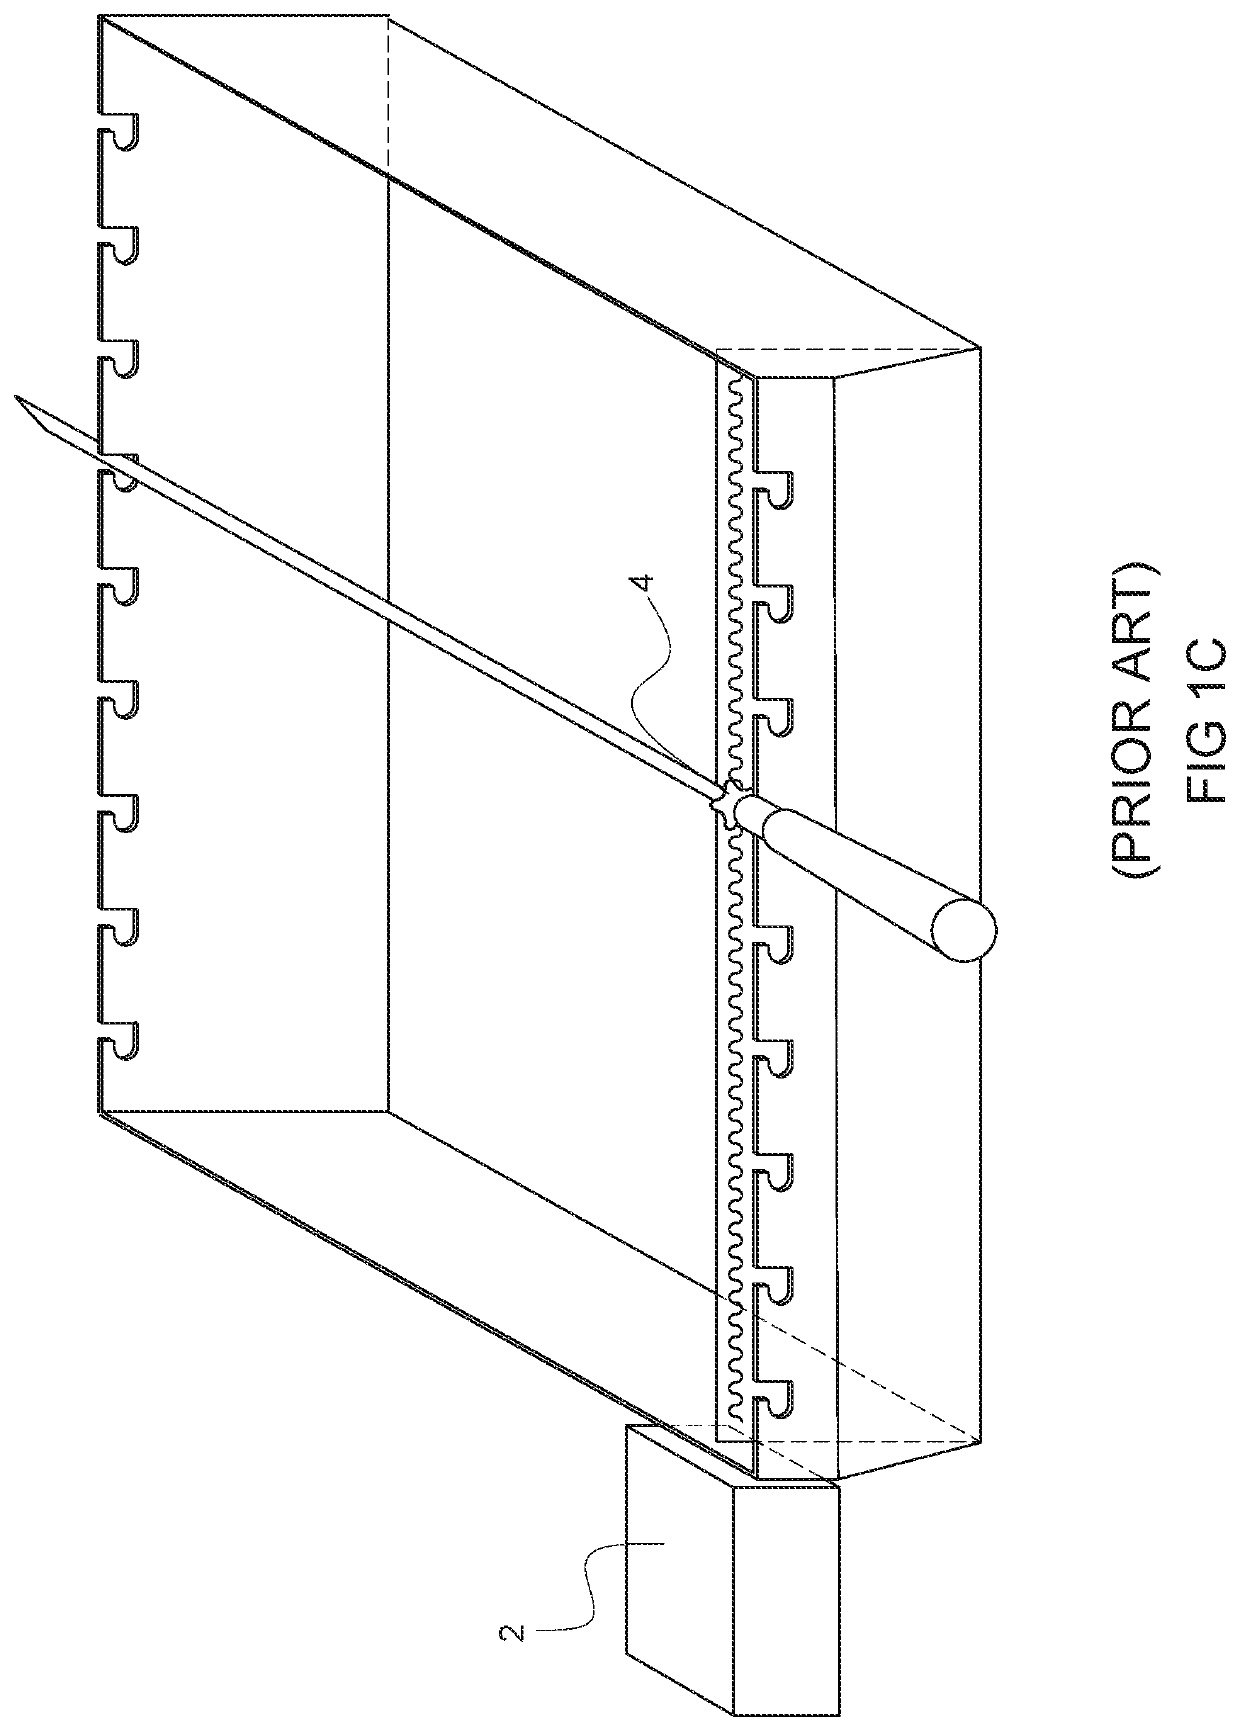 Skewer rotation system for a rotisserie grill